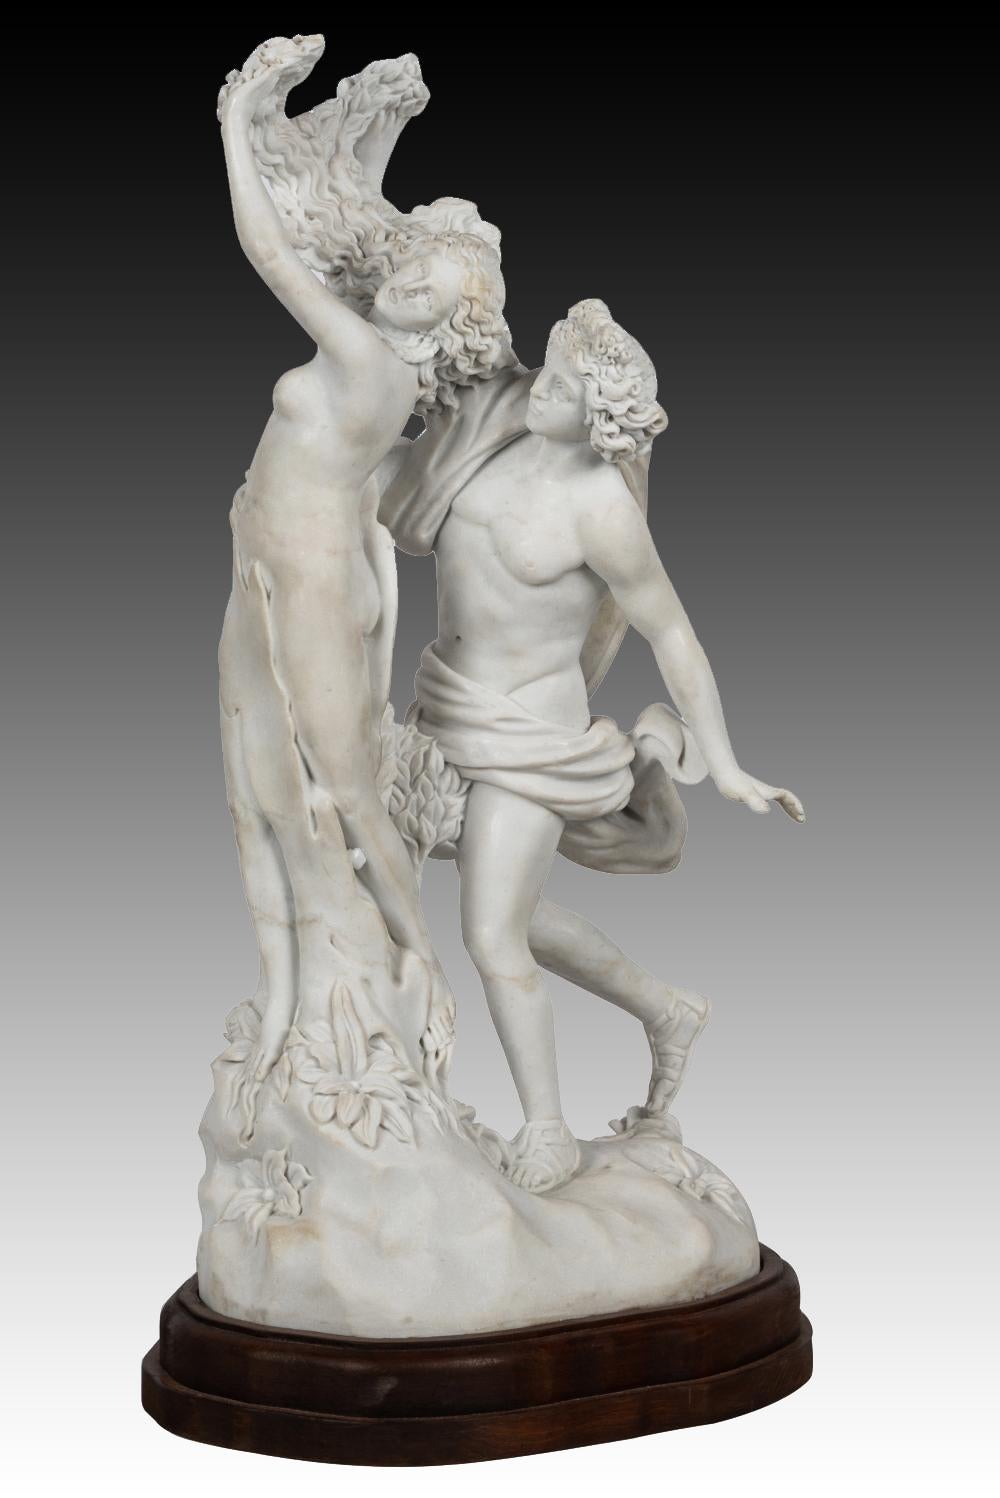 Impressive Italian hand carved white marble figure of a man behind a semi nude standing woman in a very romantic scene. unsigned.
Meticulous attention has been given to every details.. resting on carved wooden base 
Modeled after Bernini's 'Apollo